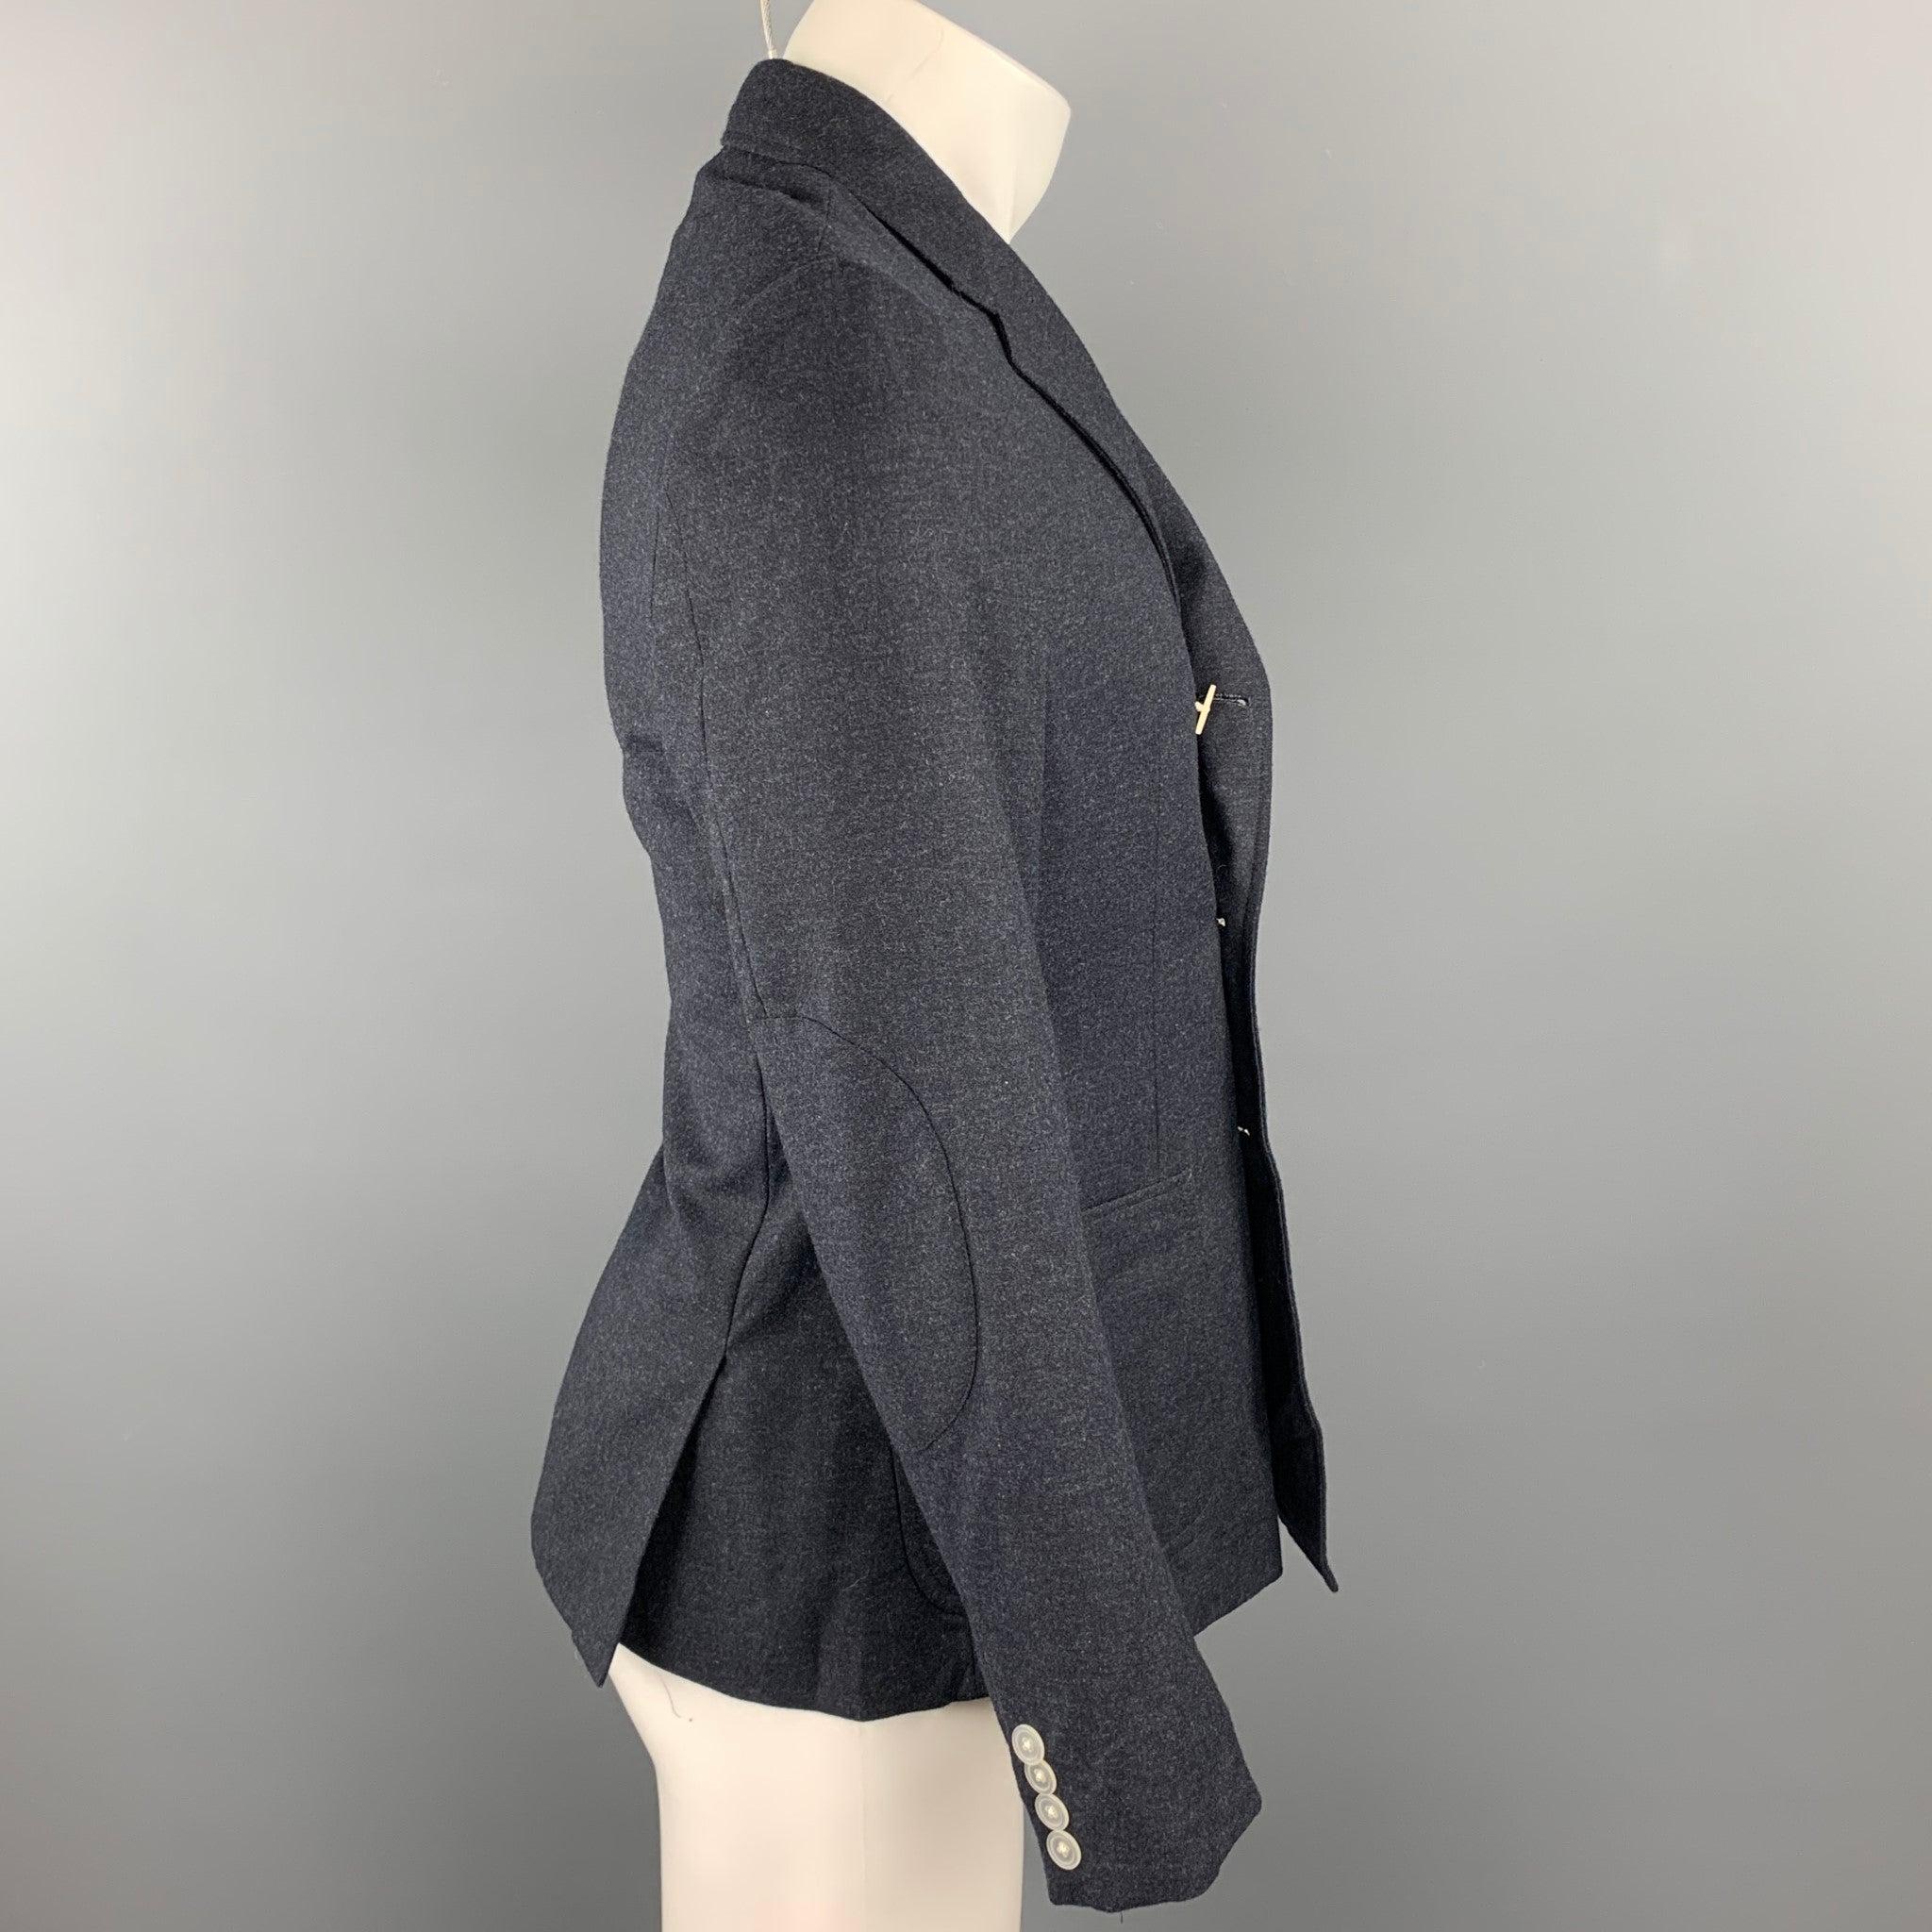 BAND OF OUTSIDERS Size 36 Charcoal Wool Double Breasted Sport Coat In Good Condition For Sale In San Francisco, CA